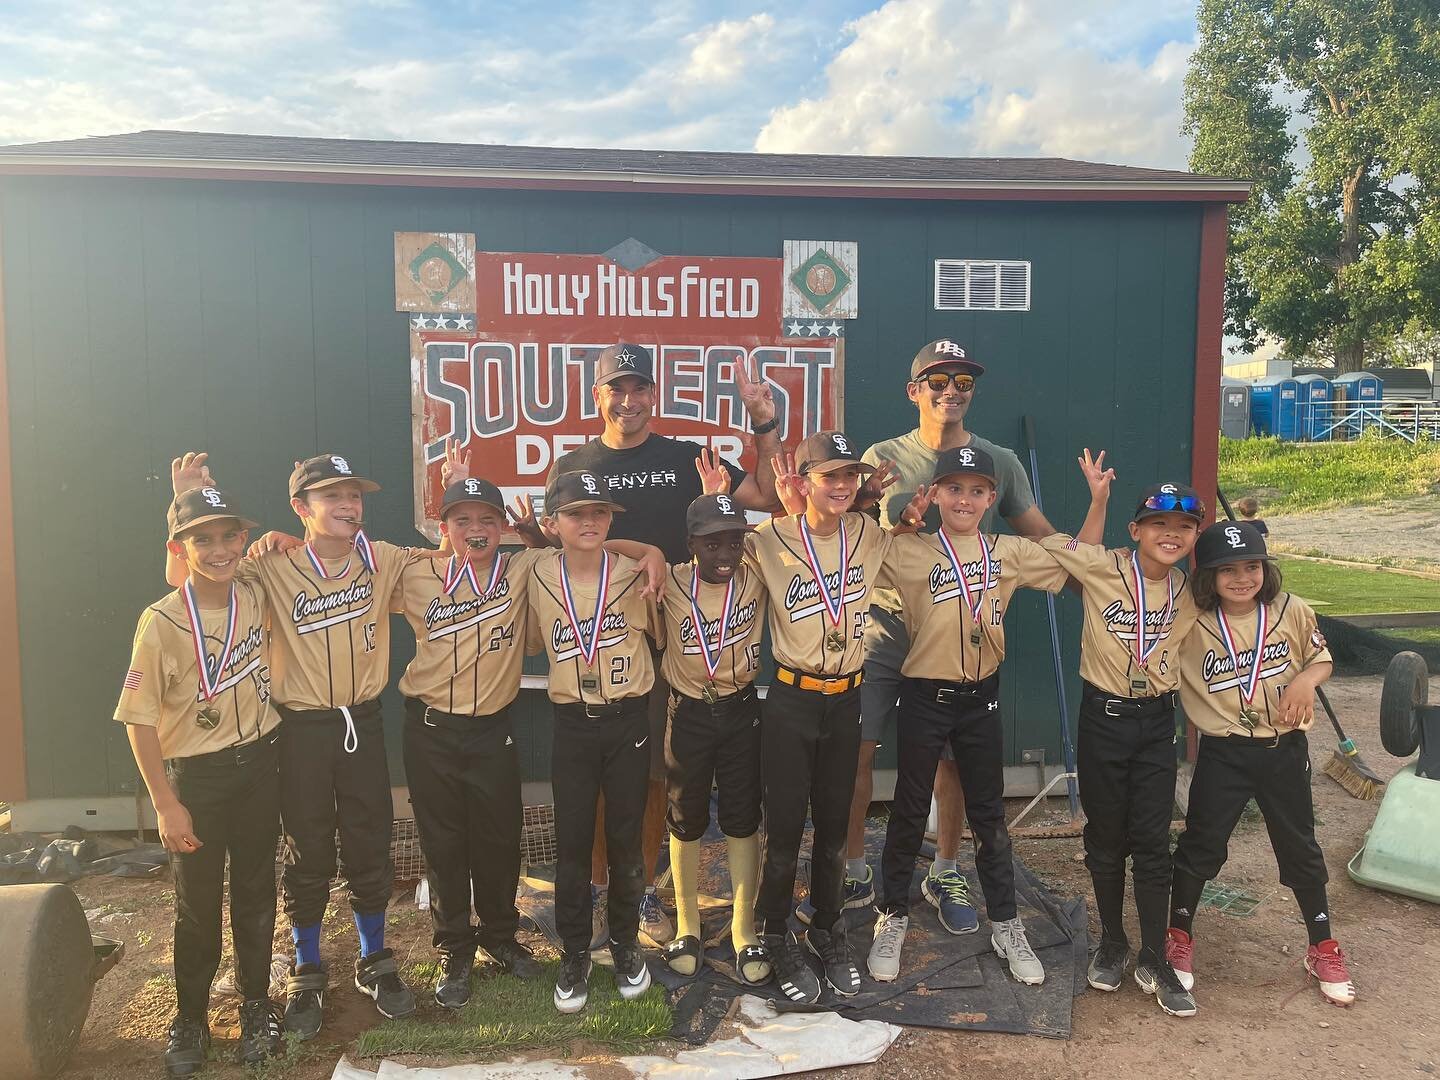 Champions again! Three years in a row winning the league championship for William and his 9U team. First year of kid pitch. The boys learned a lot this year.